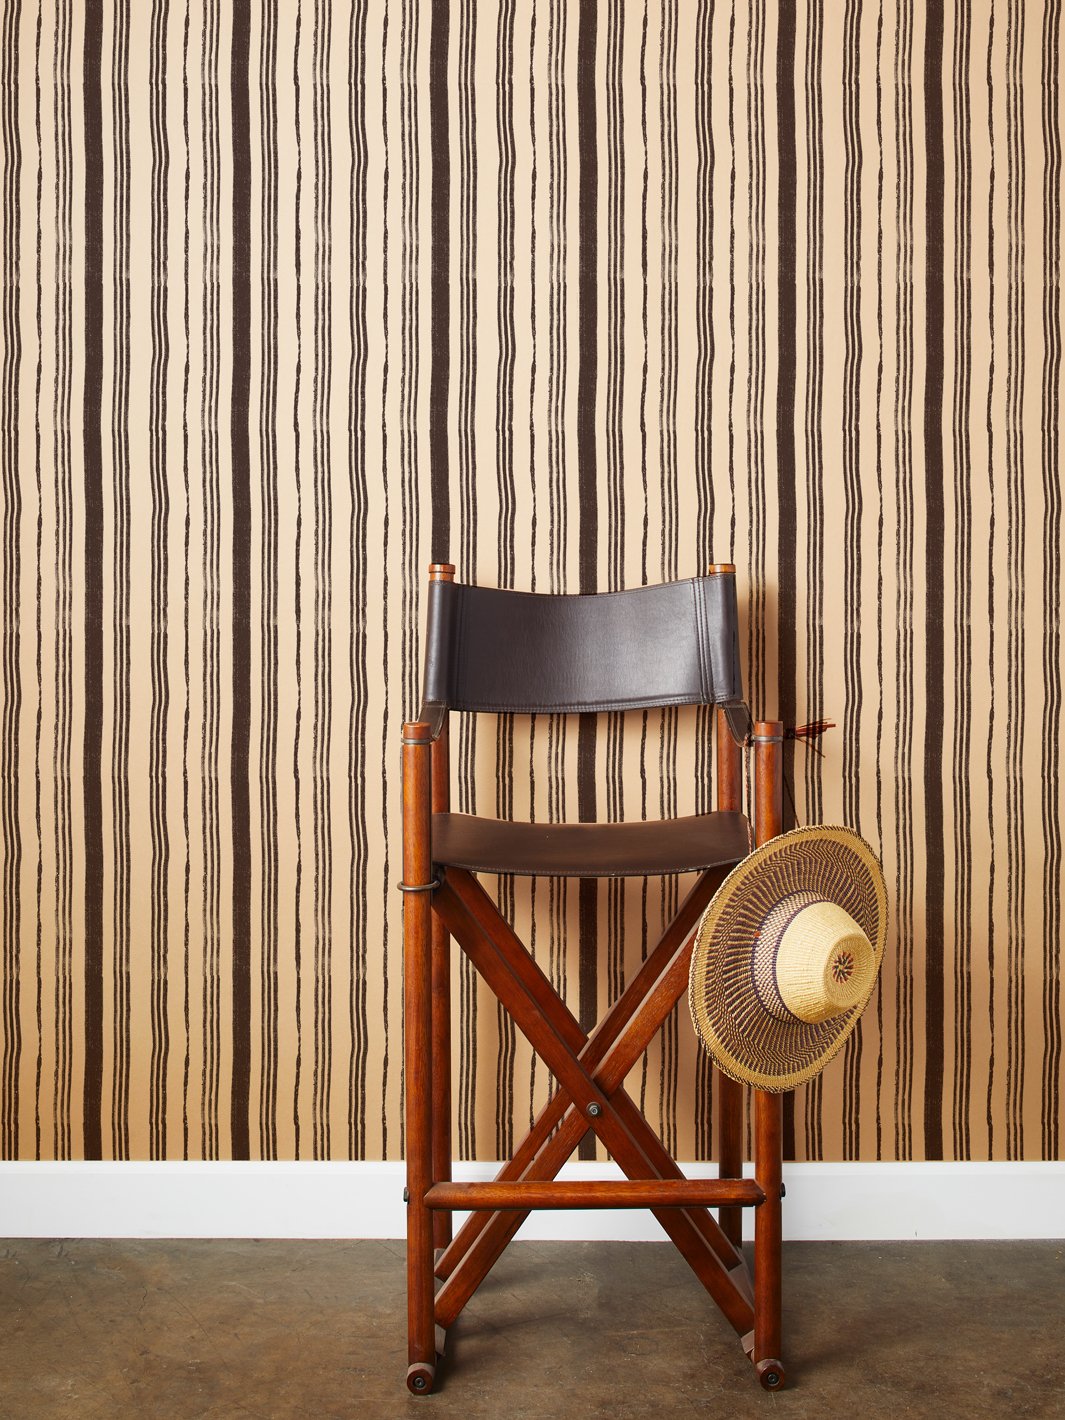 'Painted Stripes' Kraft' Wallpaper by Nathan Turner - Chocolate